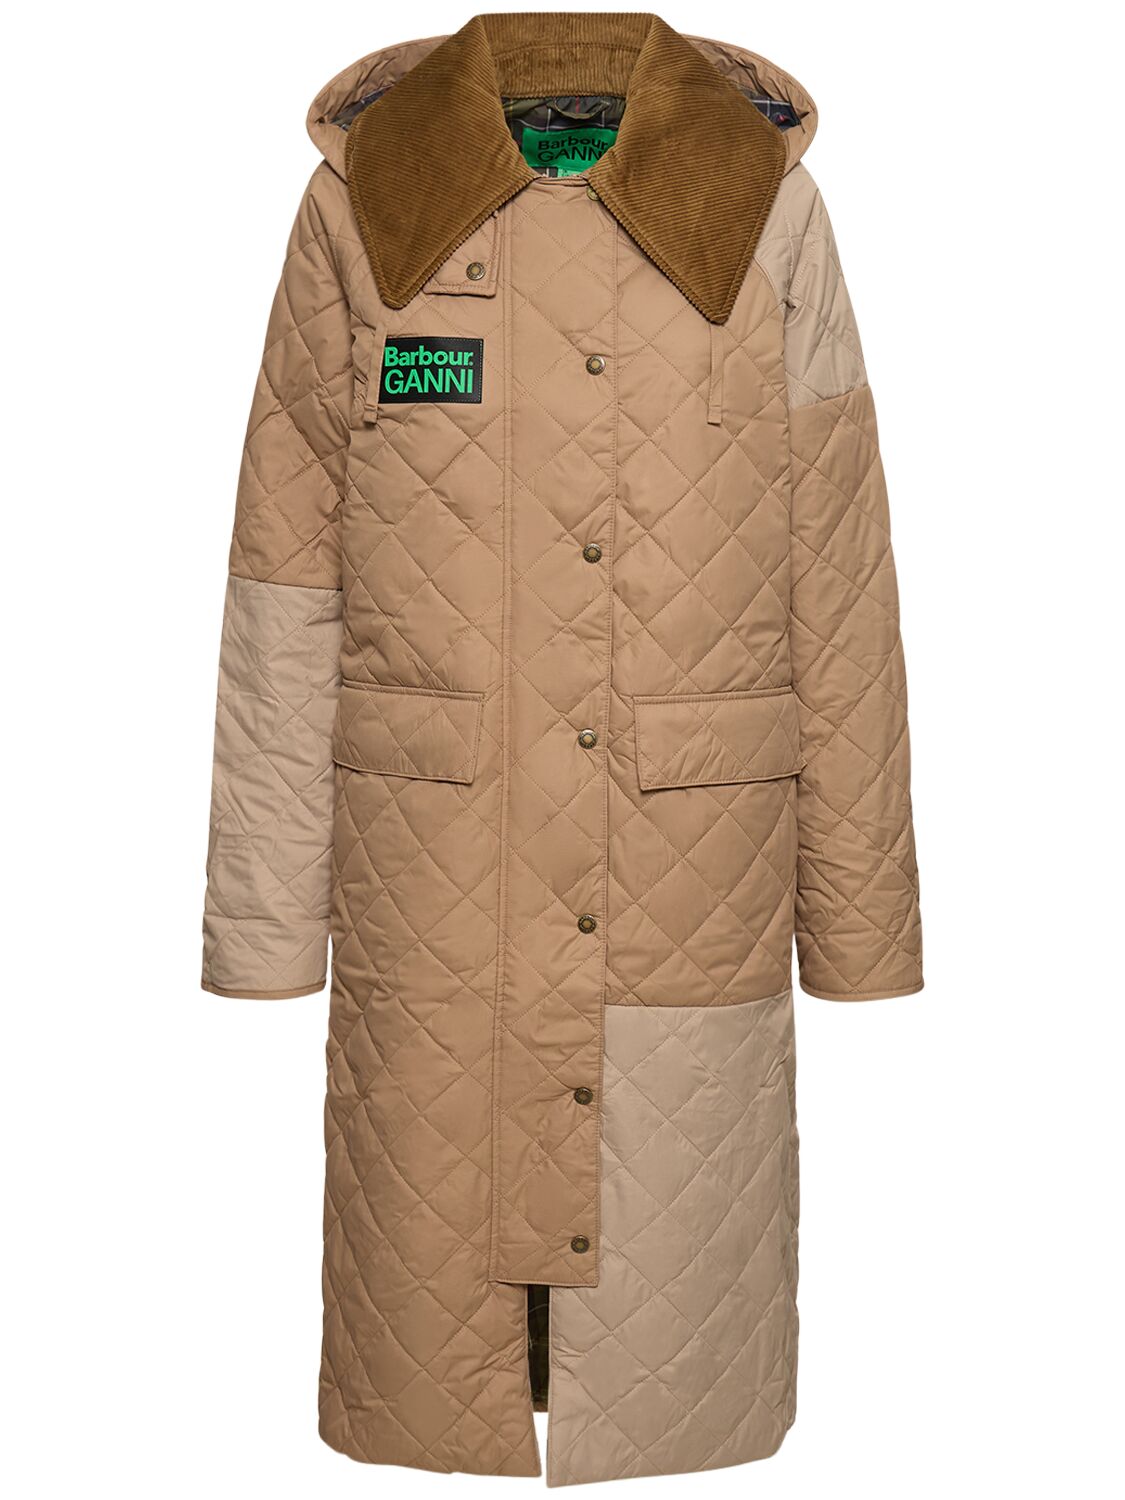 X Ganni Quilted Burghley Jacket - BARBOUR - Modalova